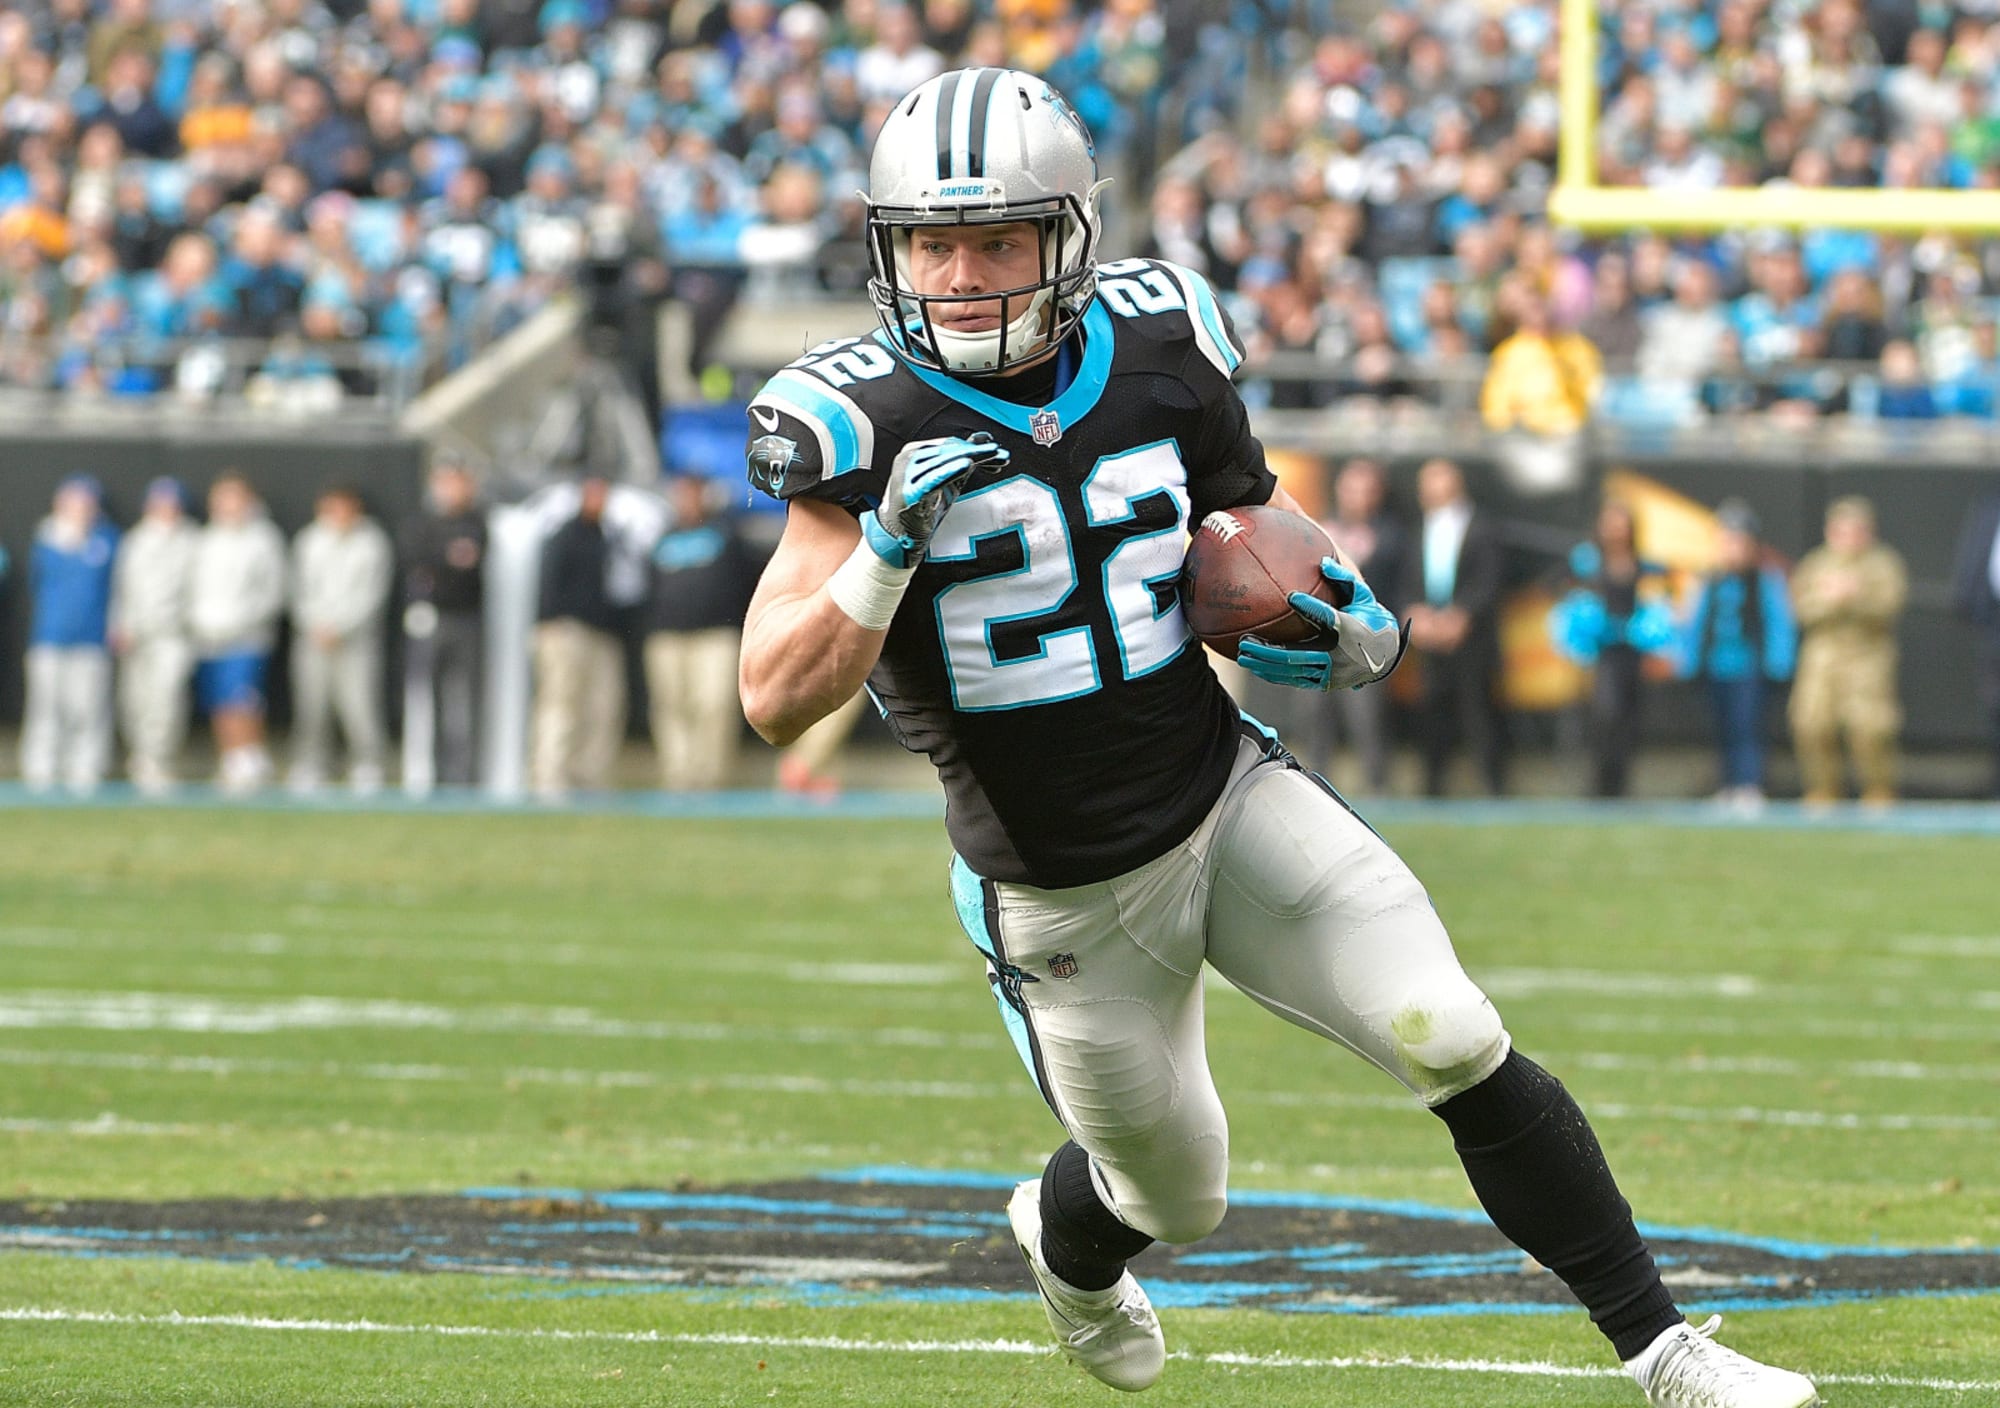 Christian McCaffrey looks like a potential fantasy beast this year